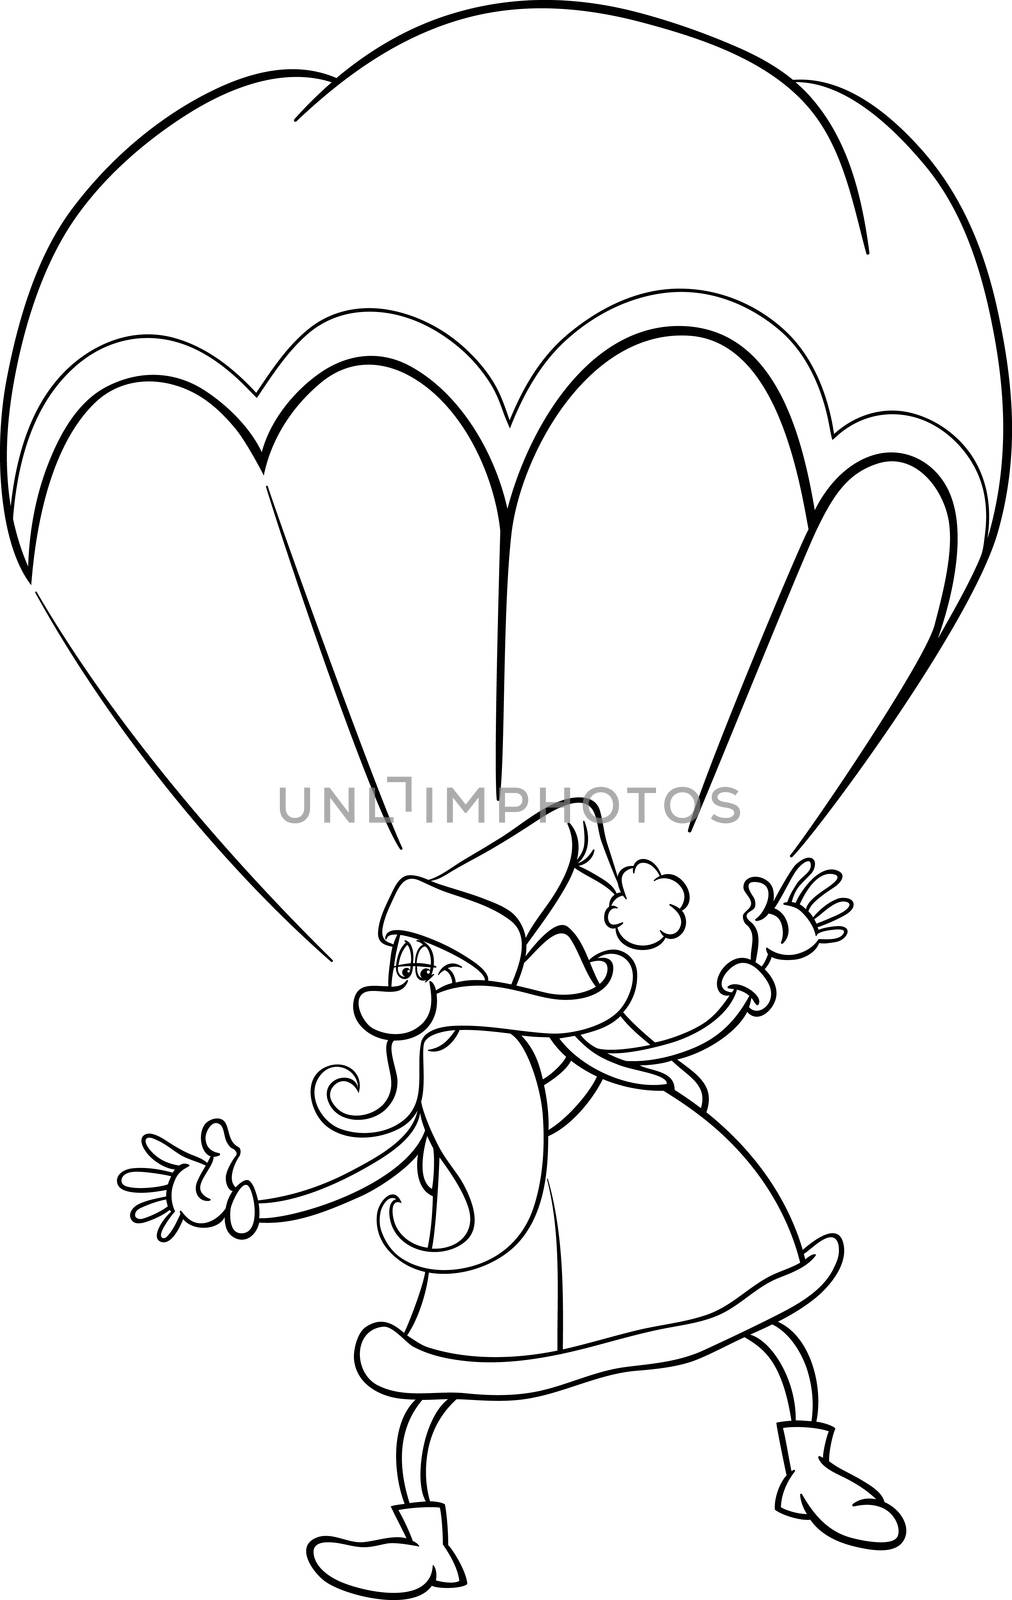 Black and White Cartoon Illustration of Funny Santa Claus Character Flying on Parachute for Coloring Book